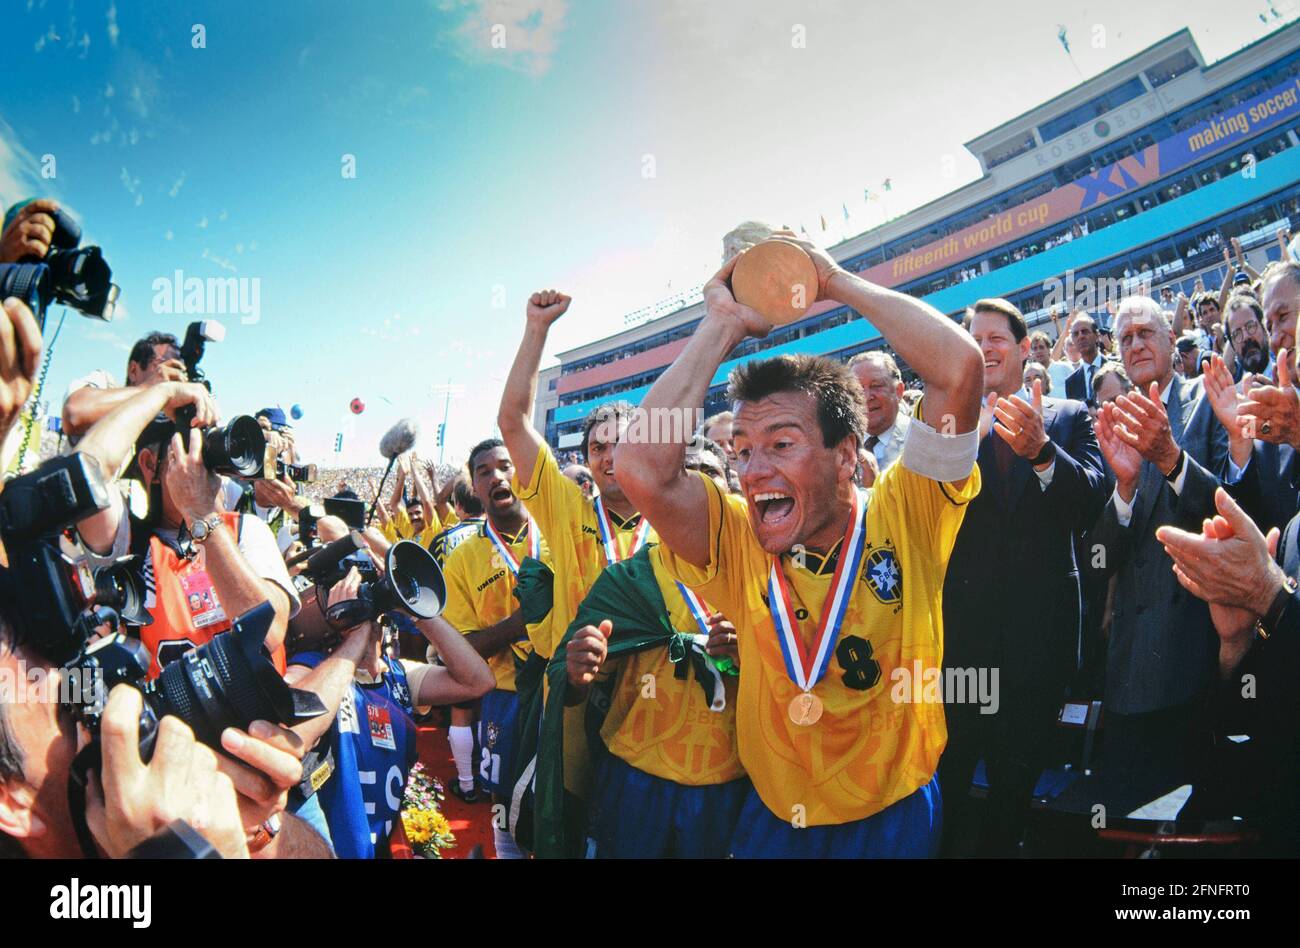 INTERNATIONAL FOOTBALL WORLD CHAMPIONSHIP 1994 FINAL Brazil - Italy 17.07.1994 Carlos Dunga (Brazil) celebrates with the World Cup trophy. Next to him Vice President Al Gore (3rd from right) FIFA President Joao Havelange (2nd from right) PHOTO: WEREK Press Photo Agency xxNOxMODELxRELEASExx [automated translation] Stock Photo